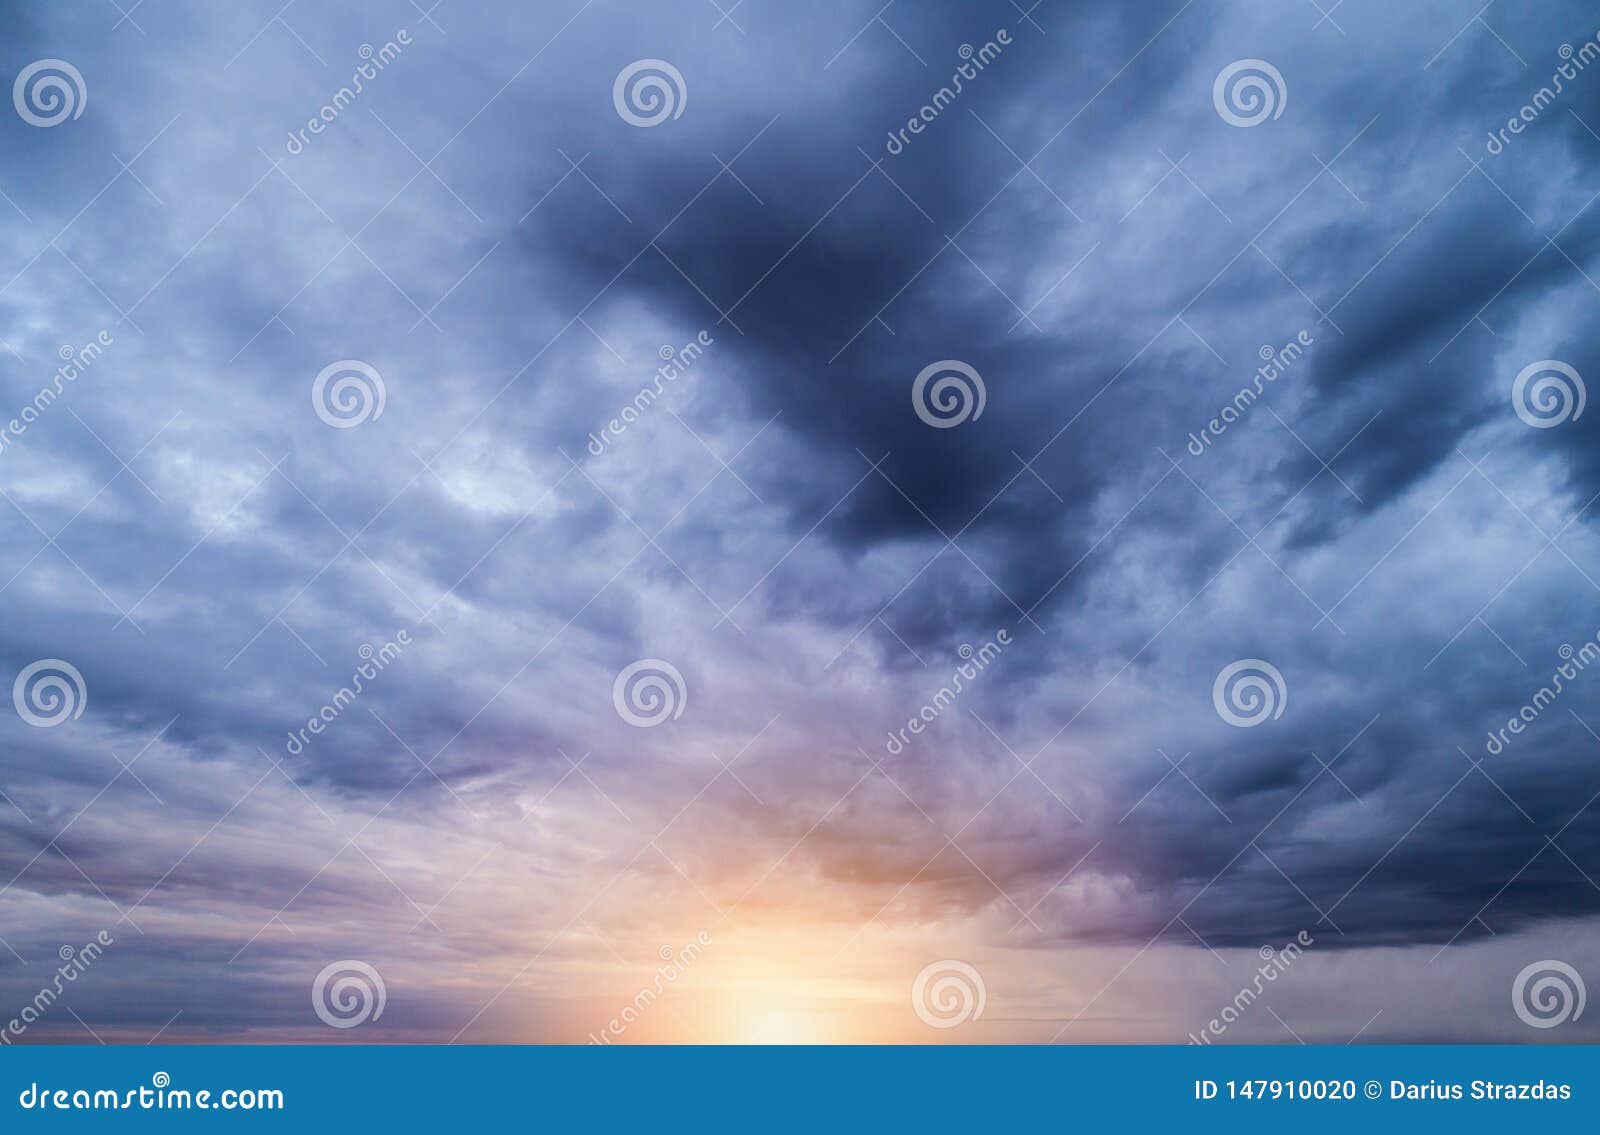 sunset and cloudy sky